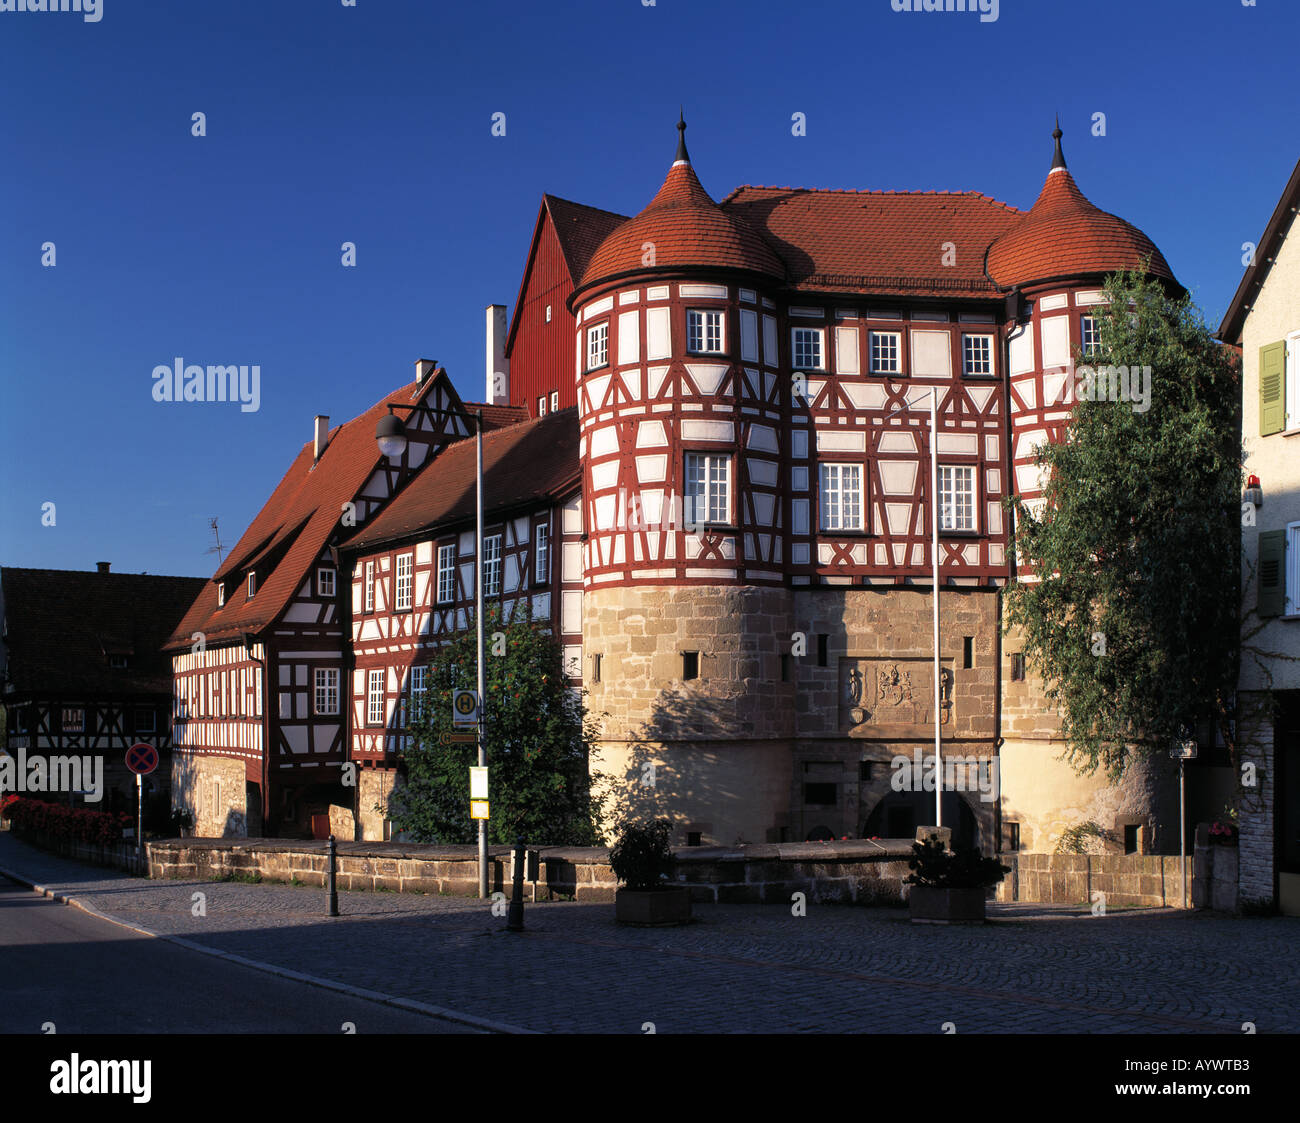 Kochertal High Resolution Stock Photography and Images - Alamy